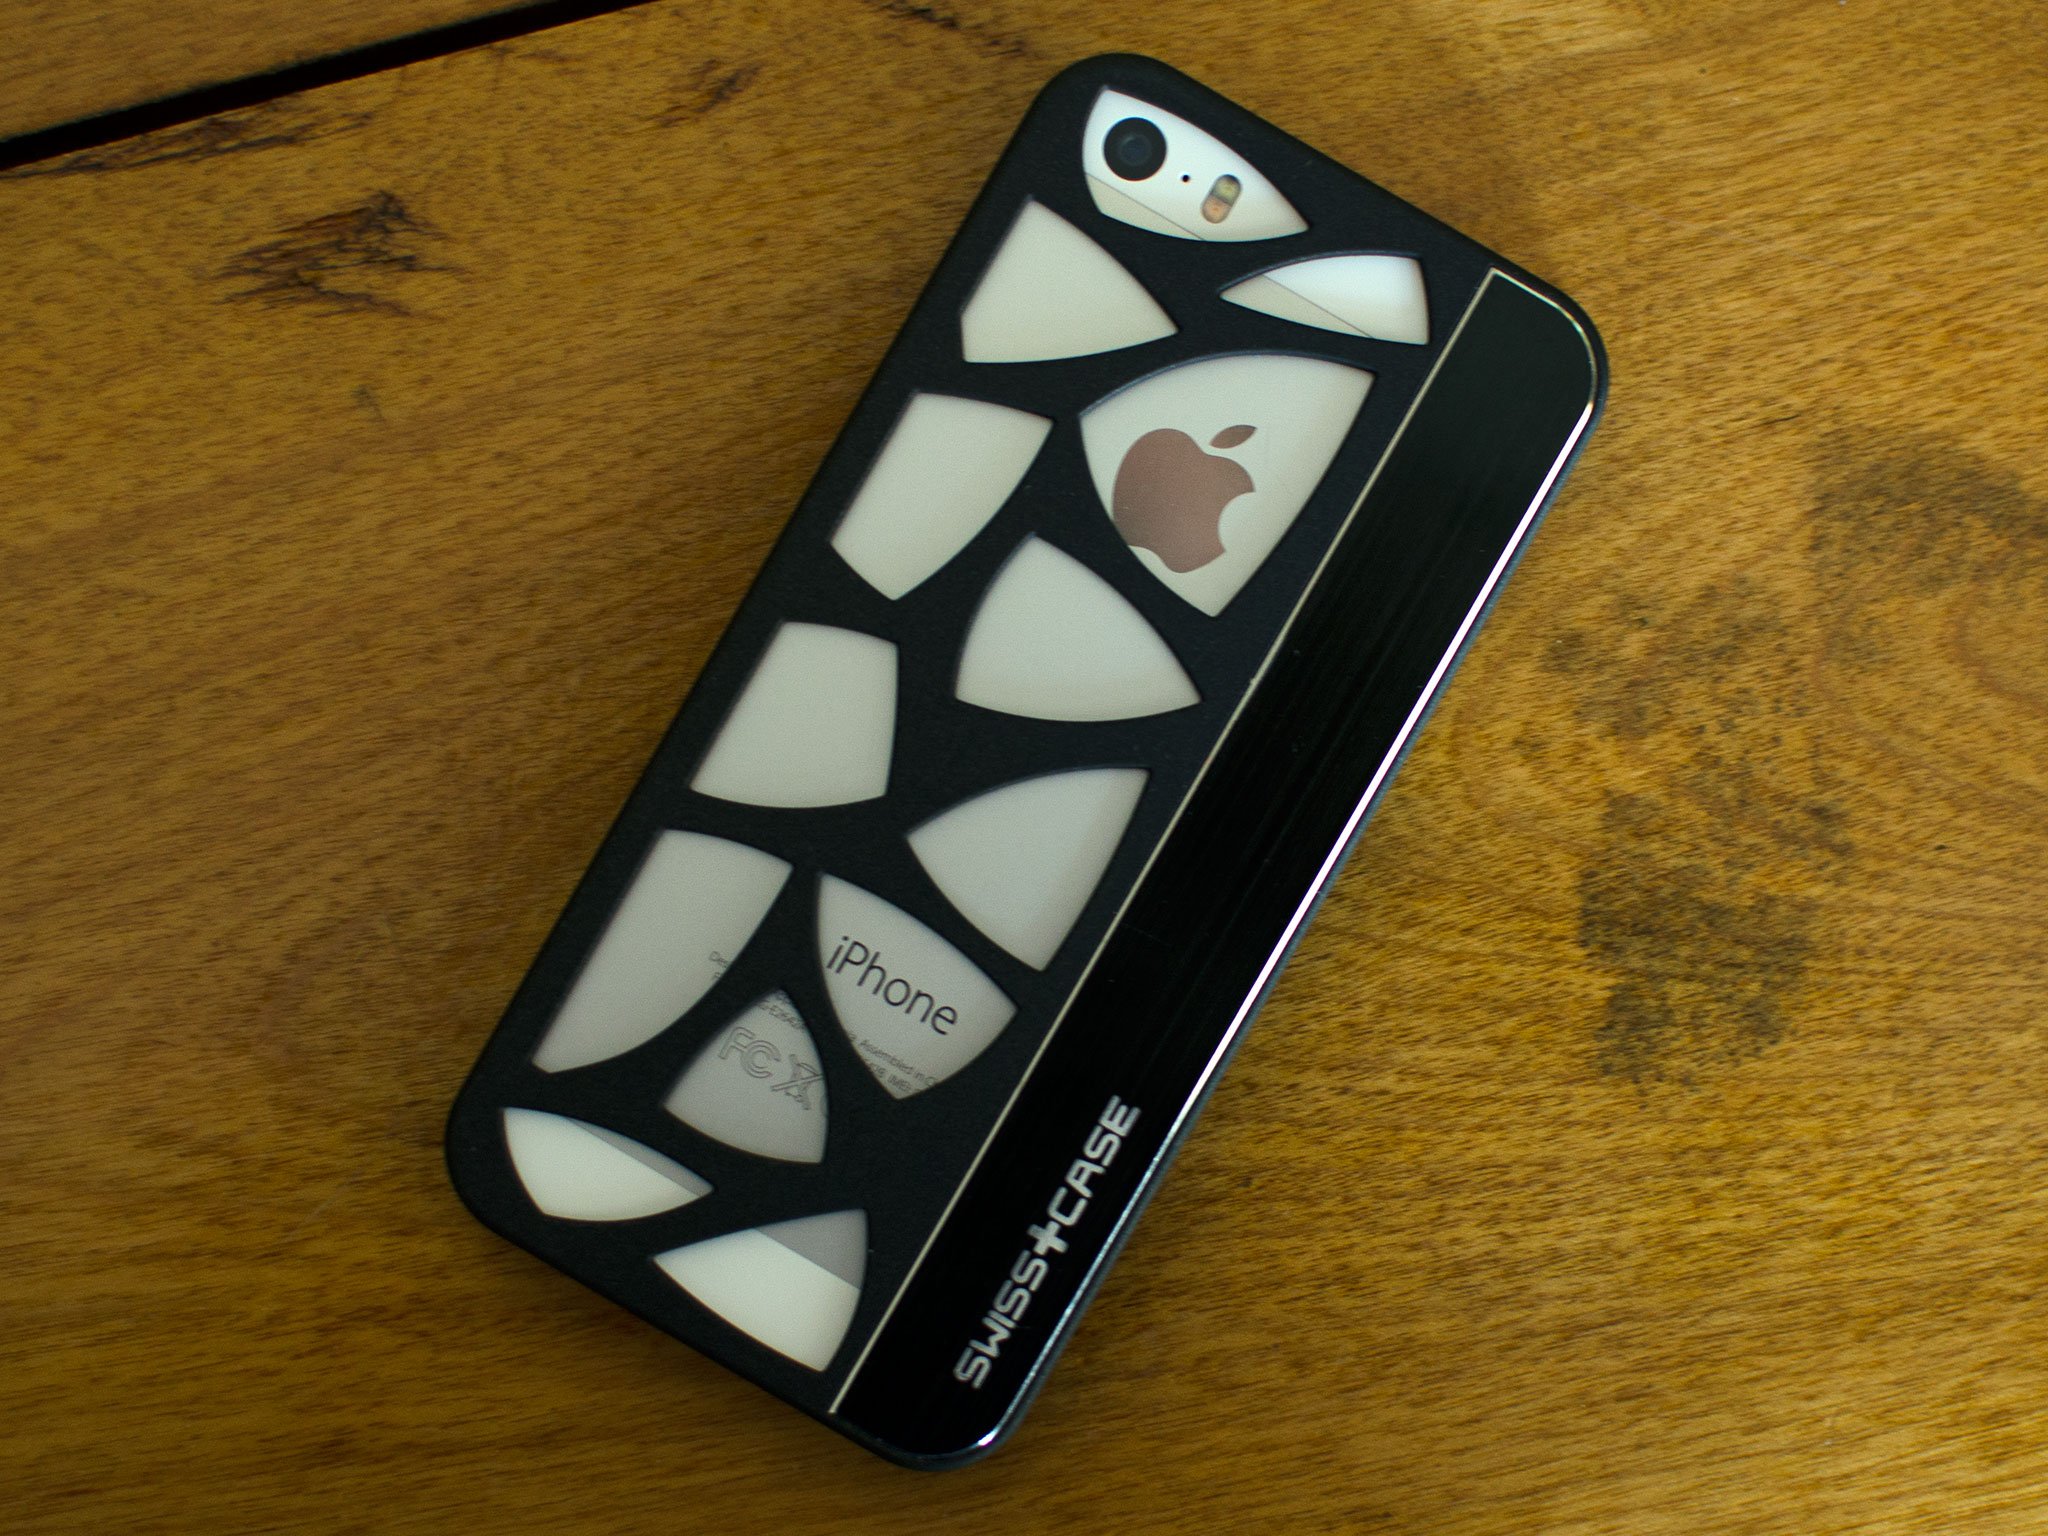 Swiss-Case Glacier Gase for iPhone 5 and iPhone 5s review